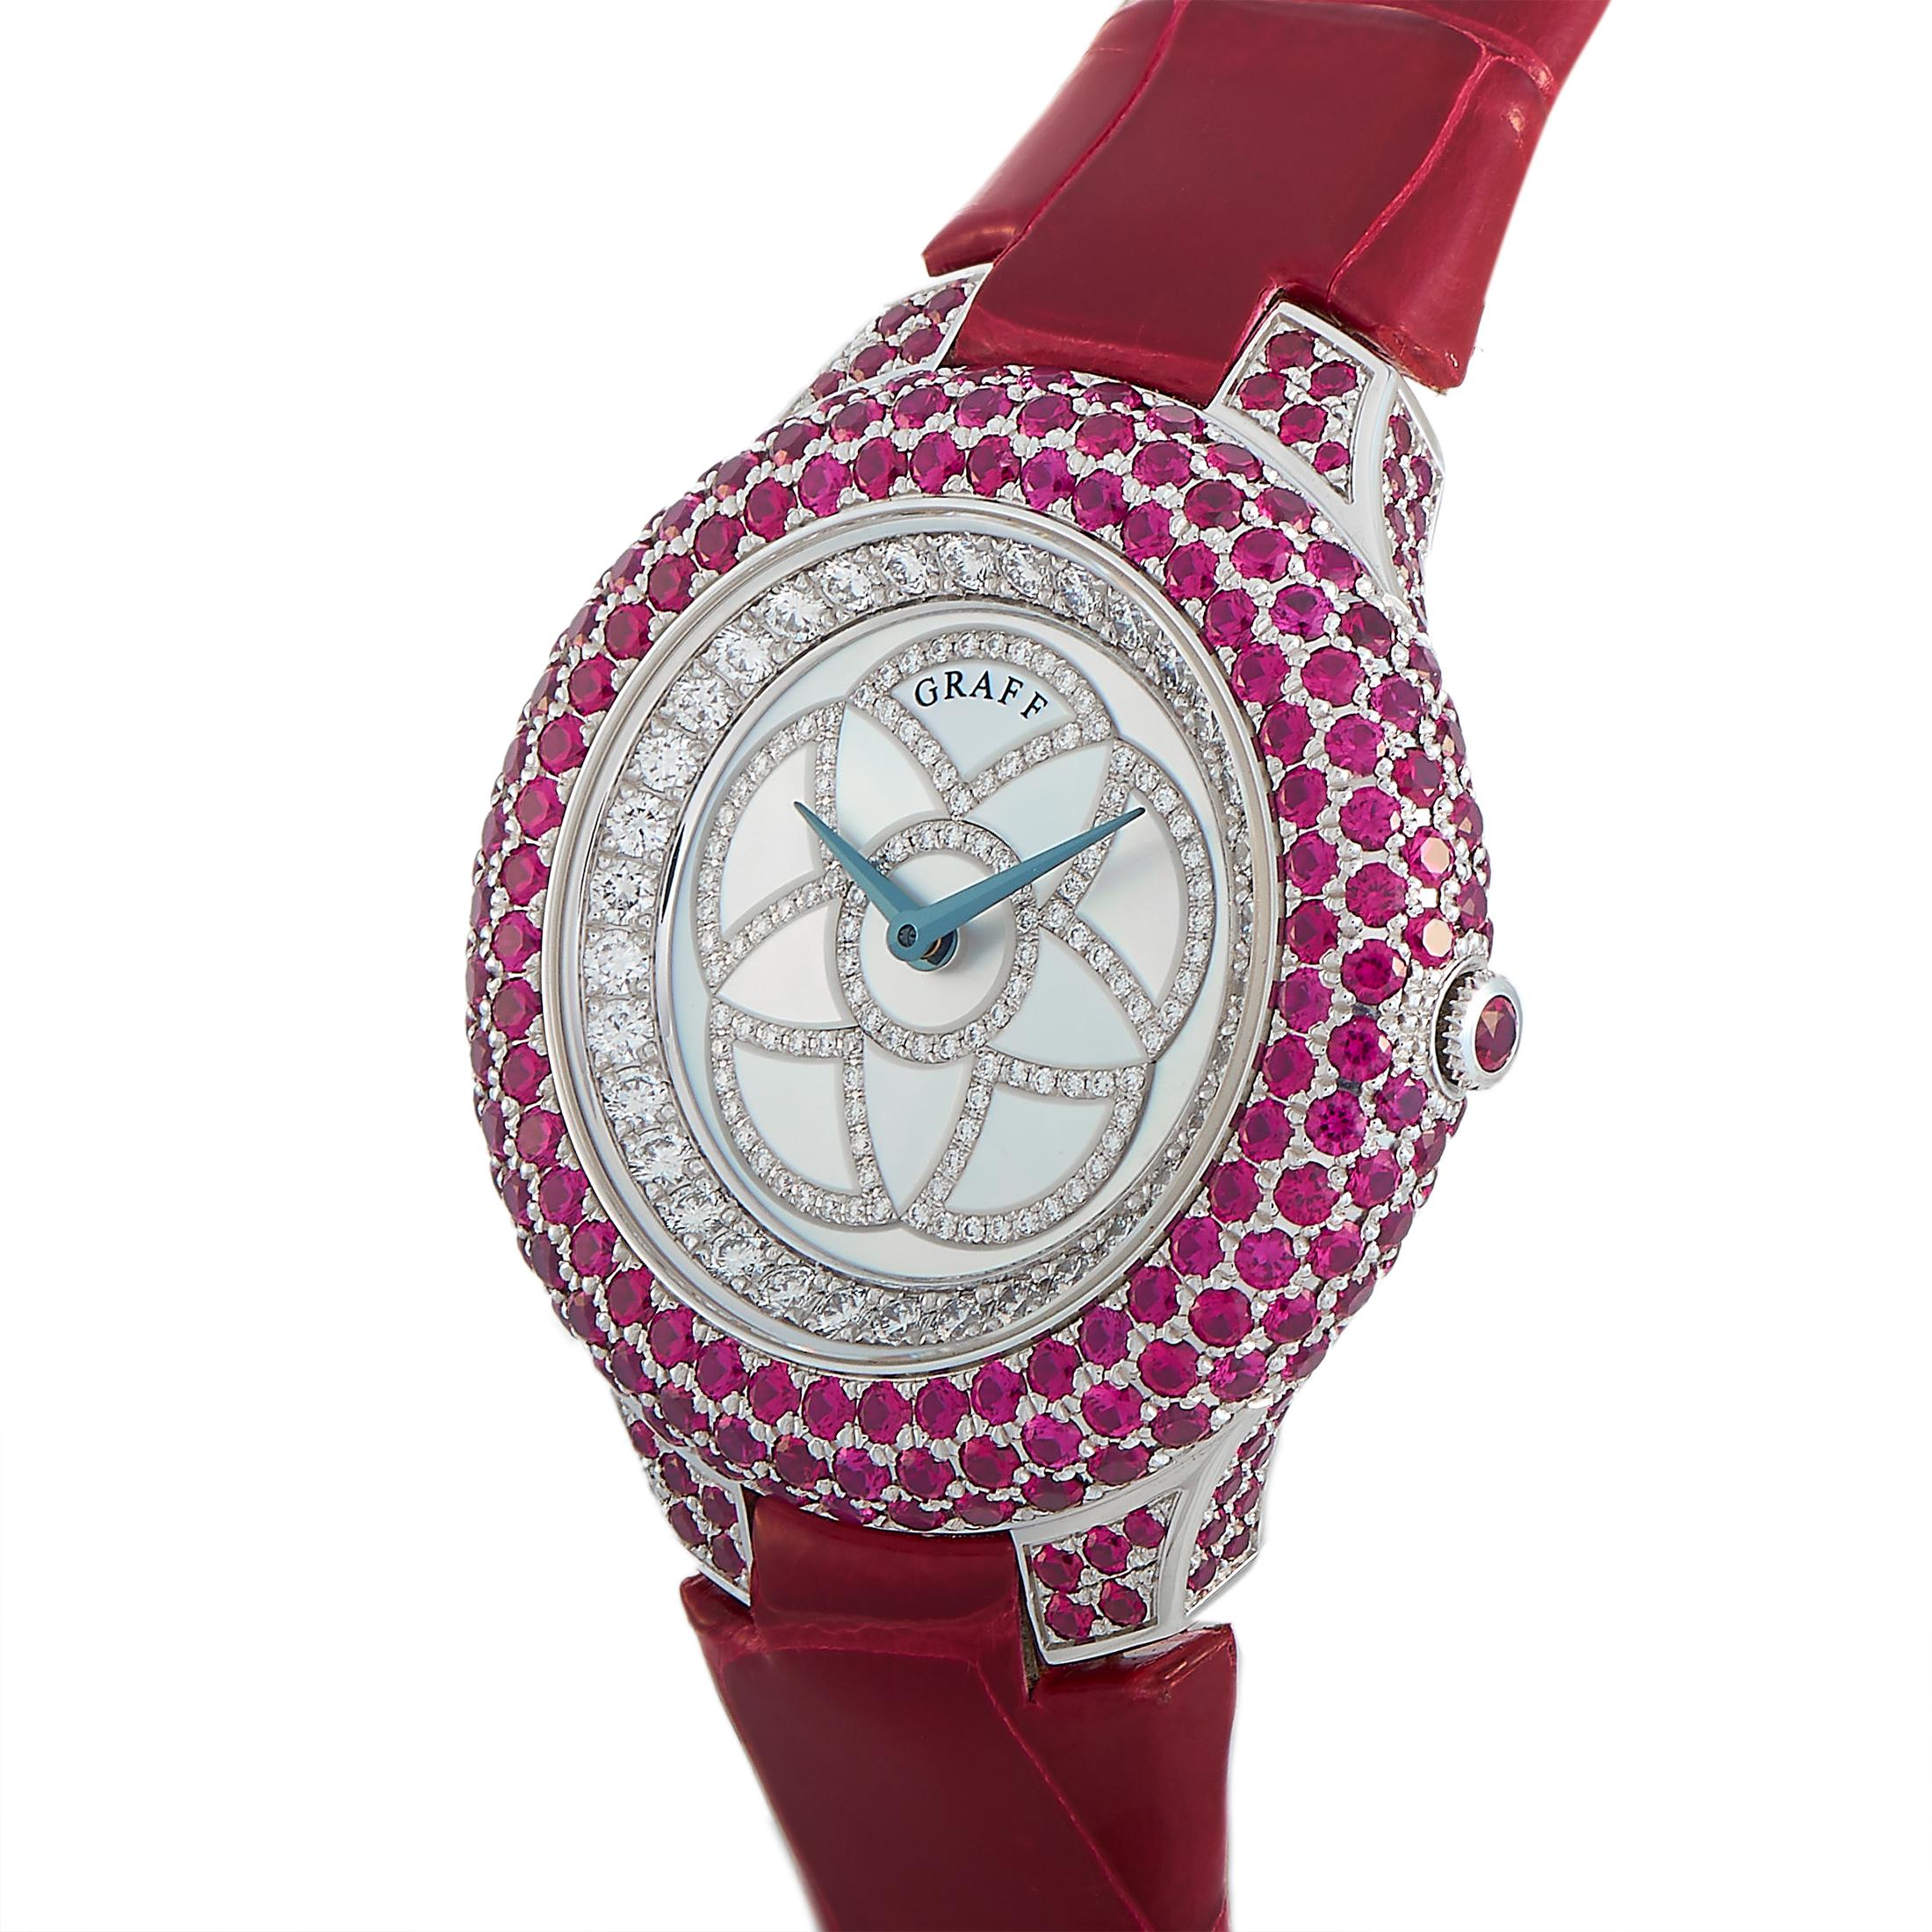 This is the Graff Halo Ruby watch, reference number GHWGRMP.

It is presented with a 36 mm 18K white gold case embellished with a plethora of rubies. The case is mounted onto a red leather strap fitted with a tang buckle. The watch is offered with a